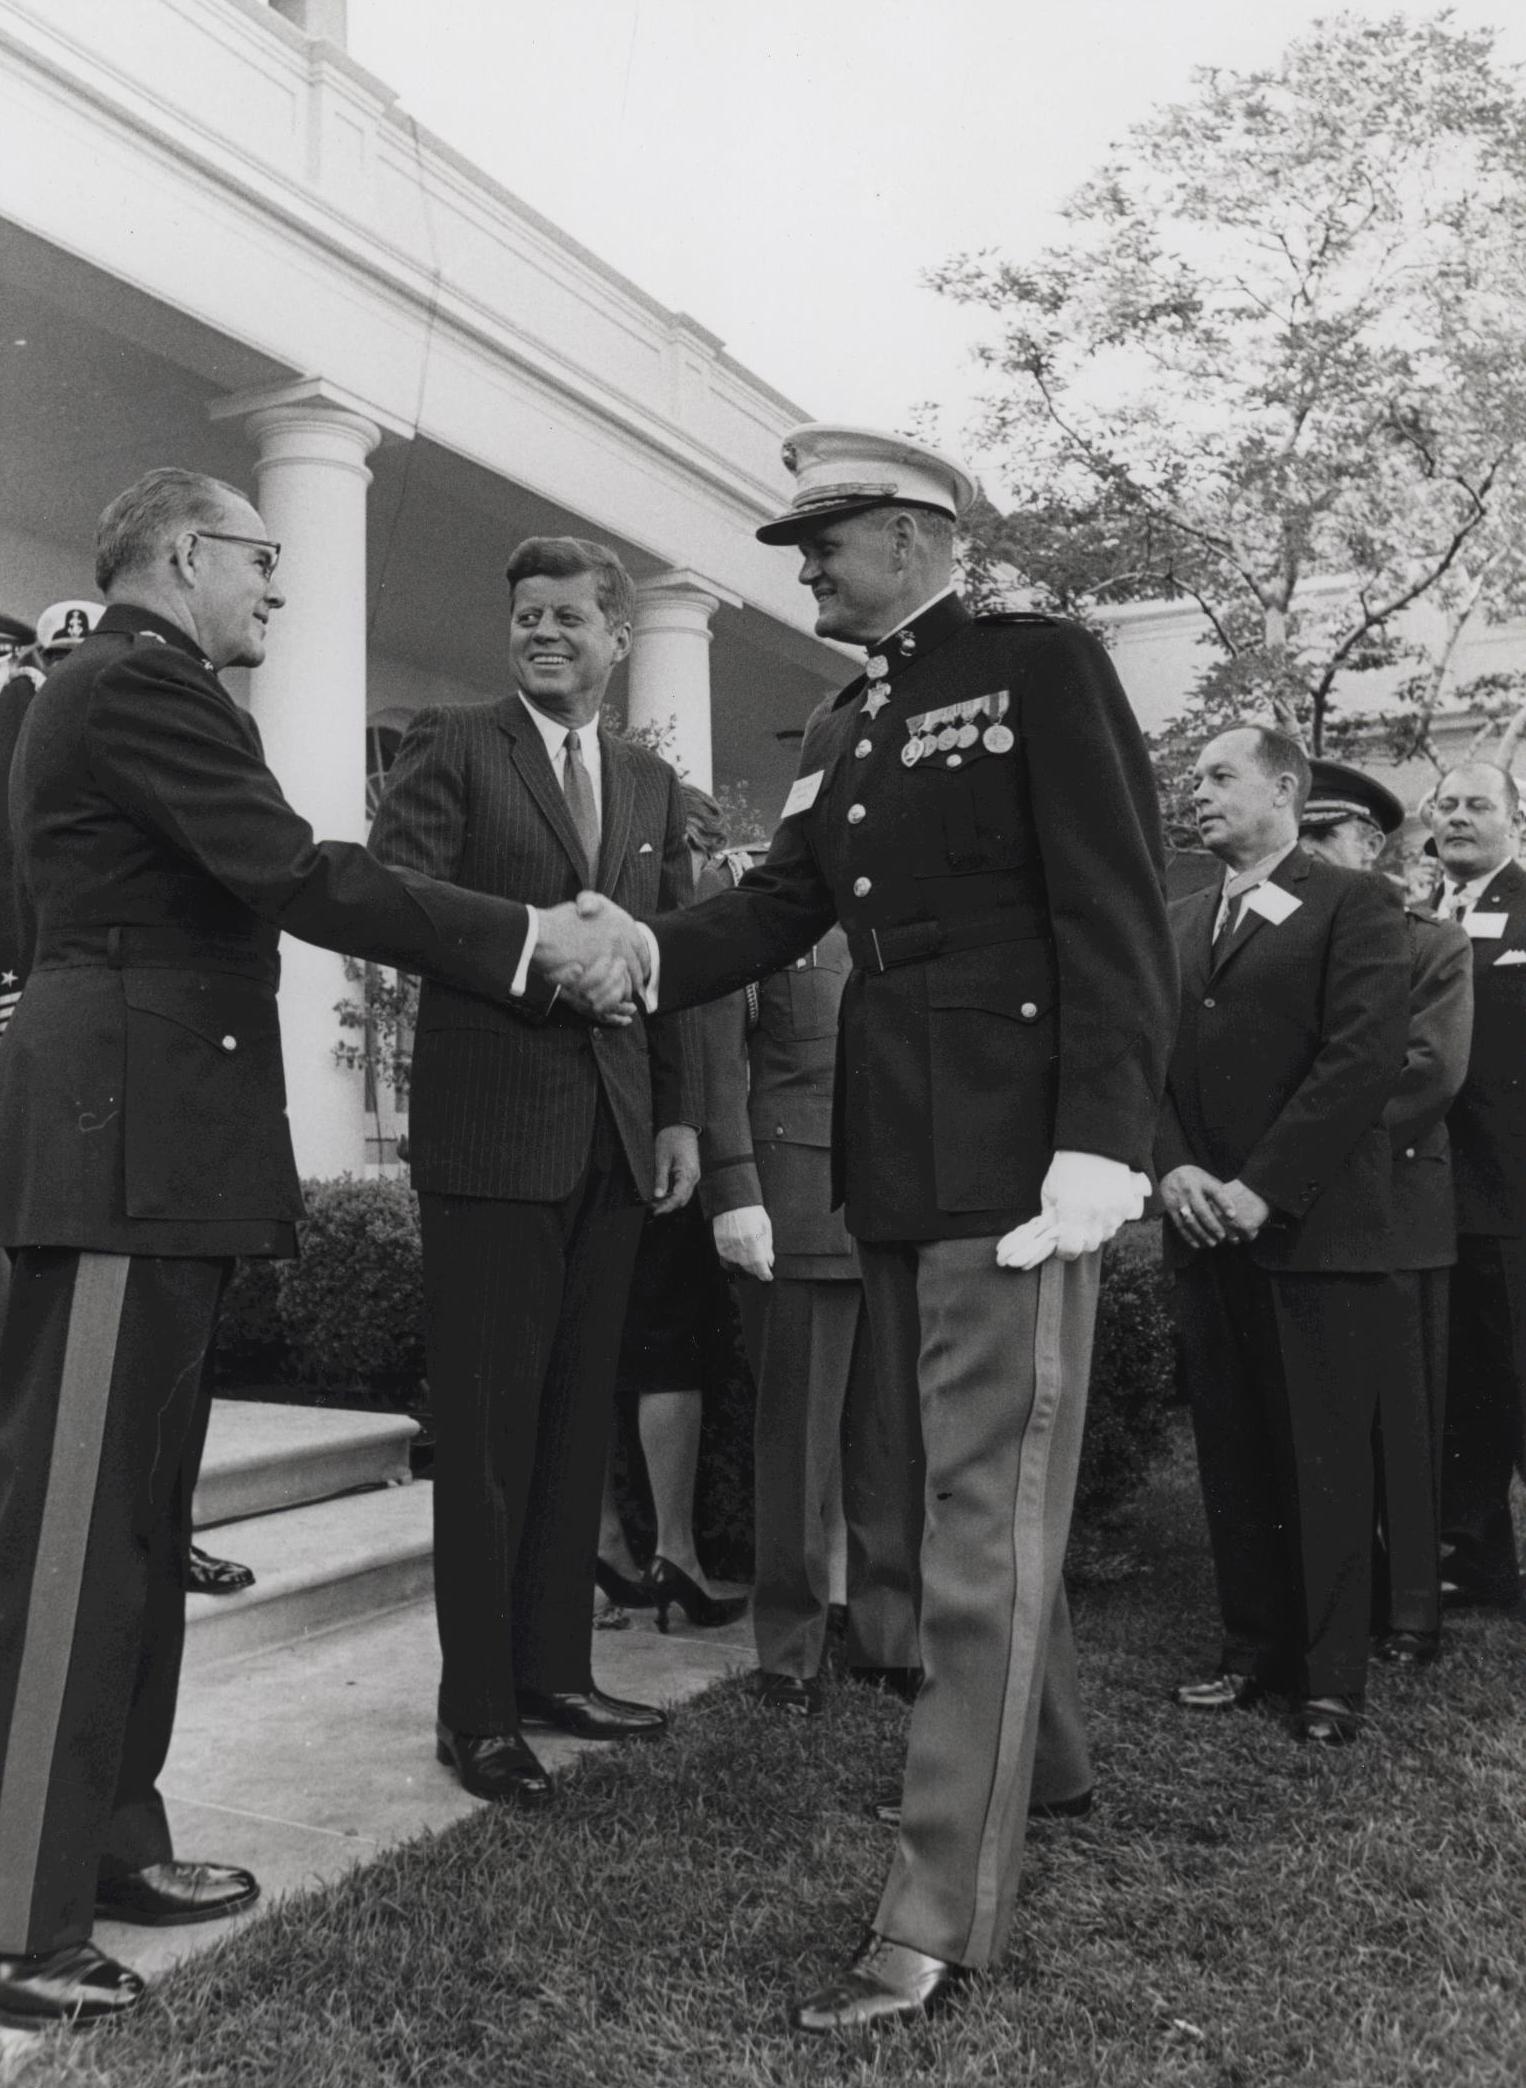 Louis Wilson, Jr. (right) shaking hands with USMC Commandant David Shoup, both Medal of Honor recipients, in the presence of President John Kennedy, White House, Washington DC, United States, circa 1962